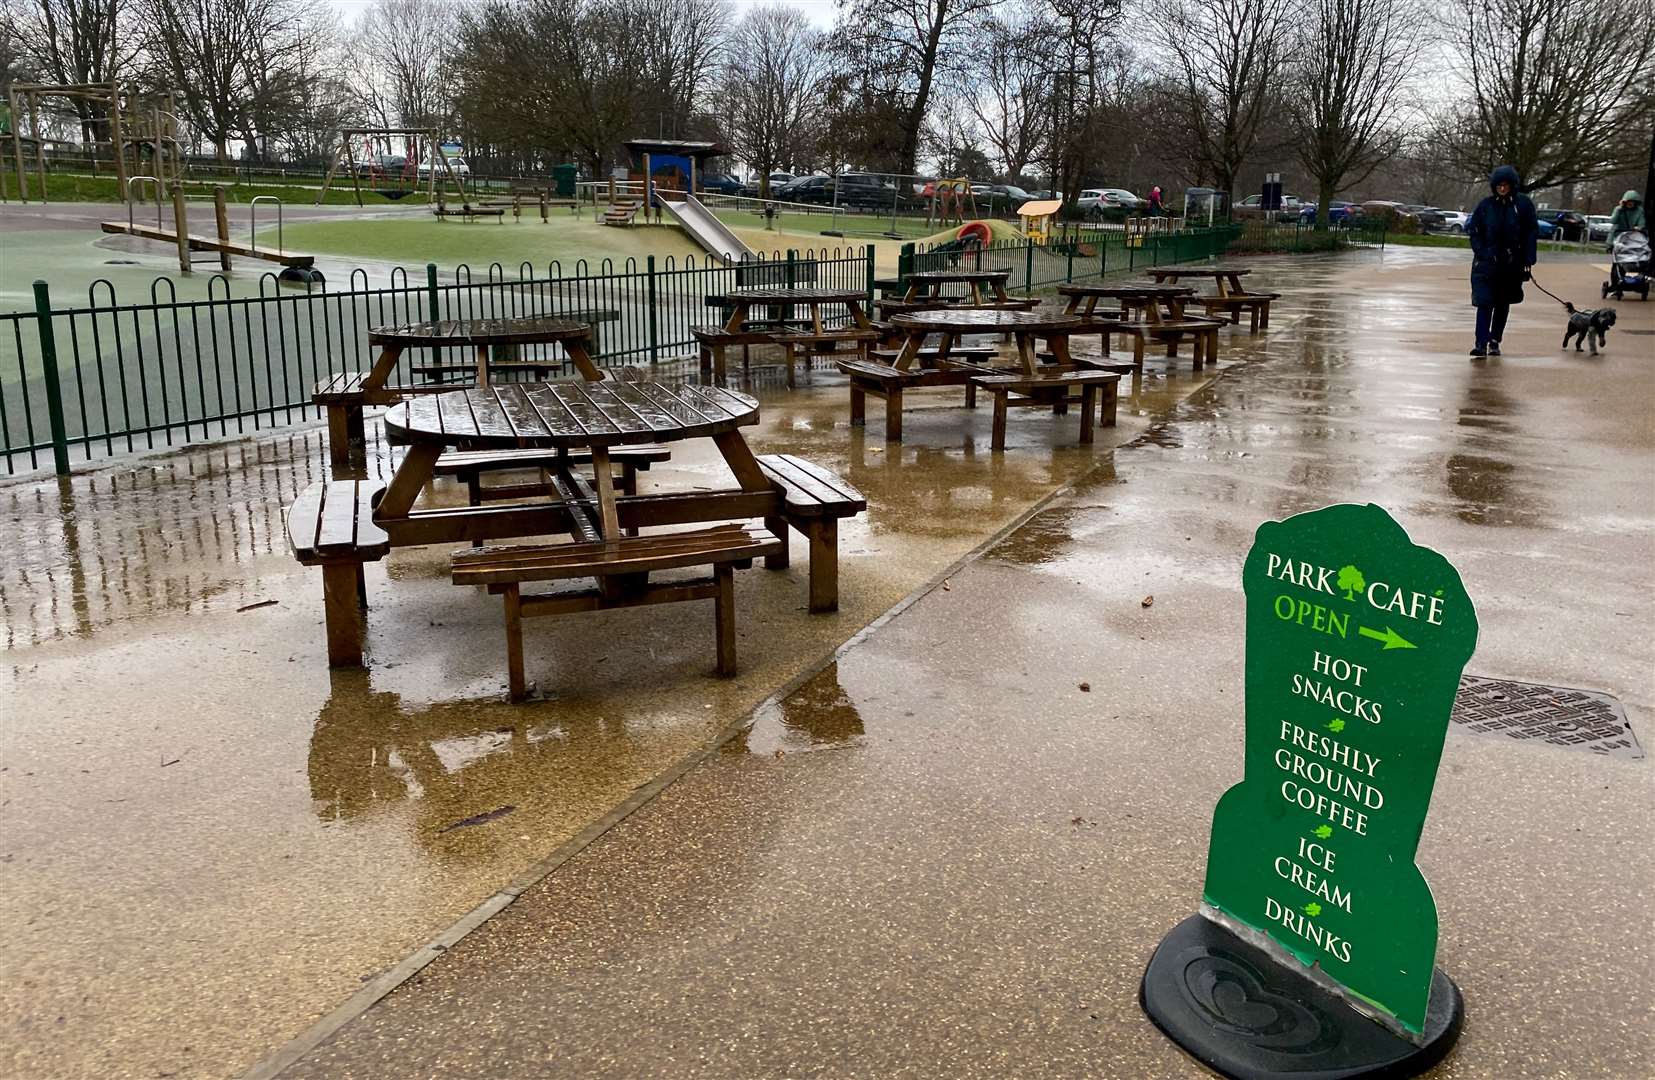 The play area and picnic benches outside the café were empty on this particular visit. Picture: Sam Lawrie